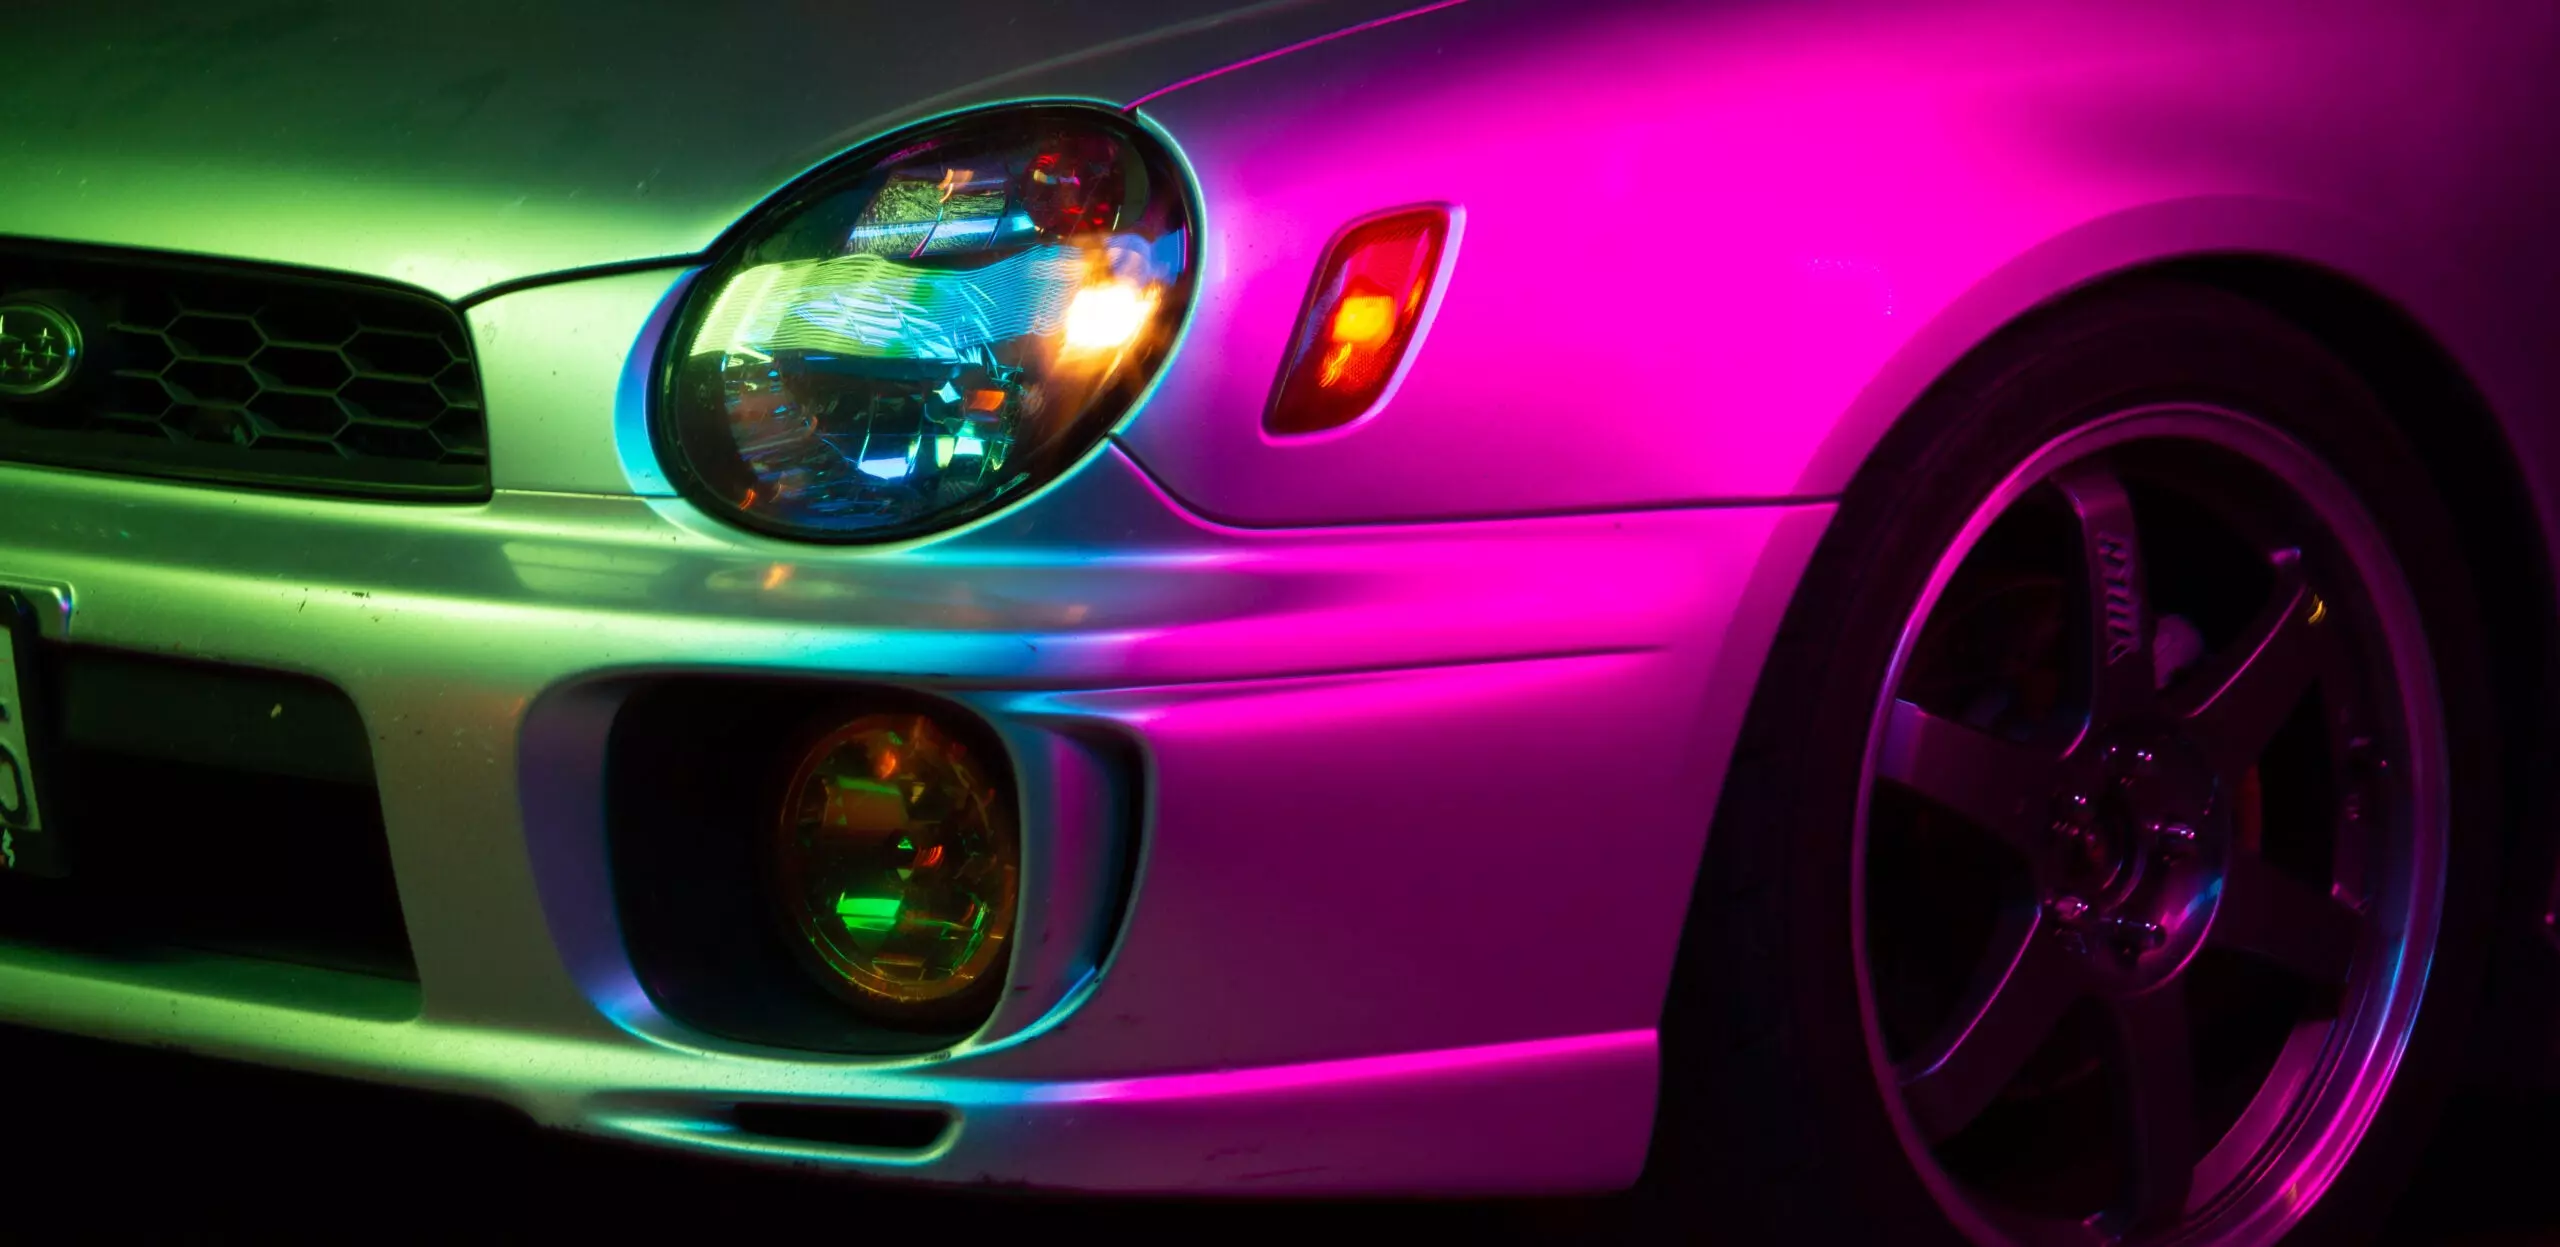 Lights and Color Can Take Your Car Photos to Another Level | Autance